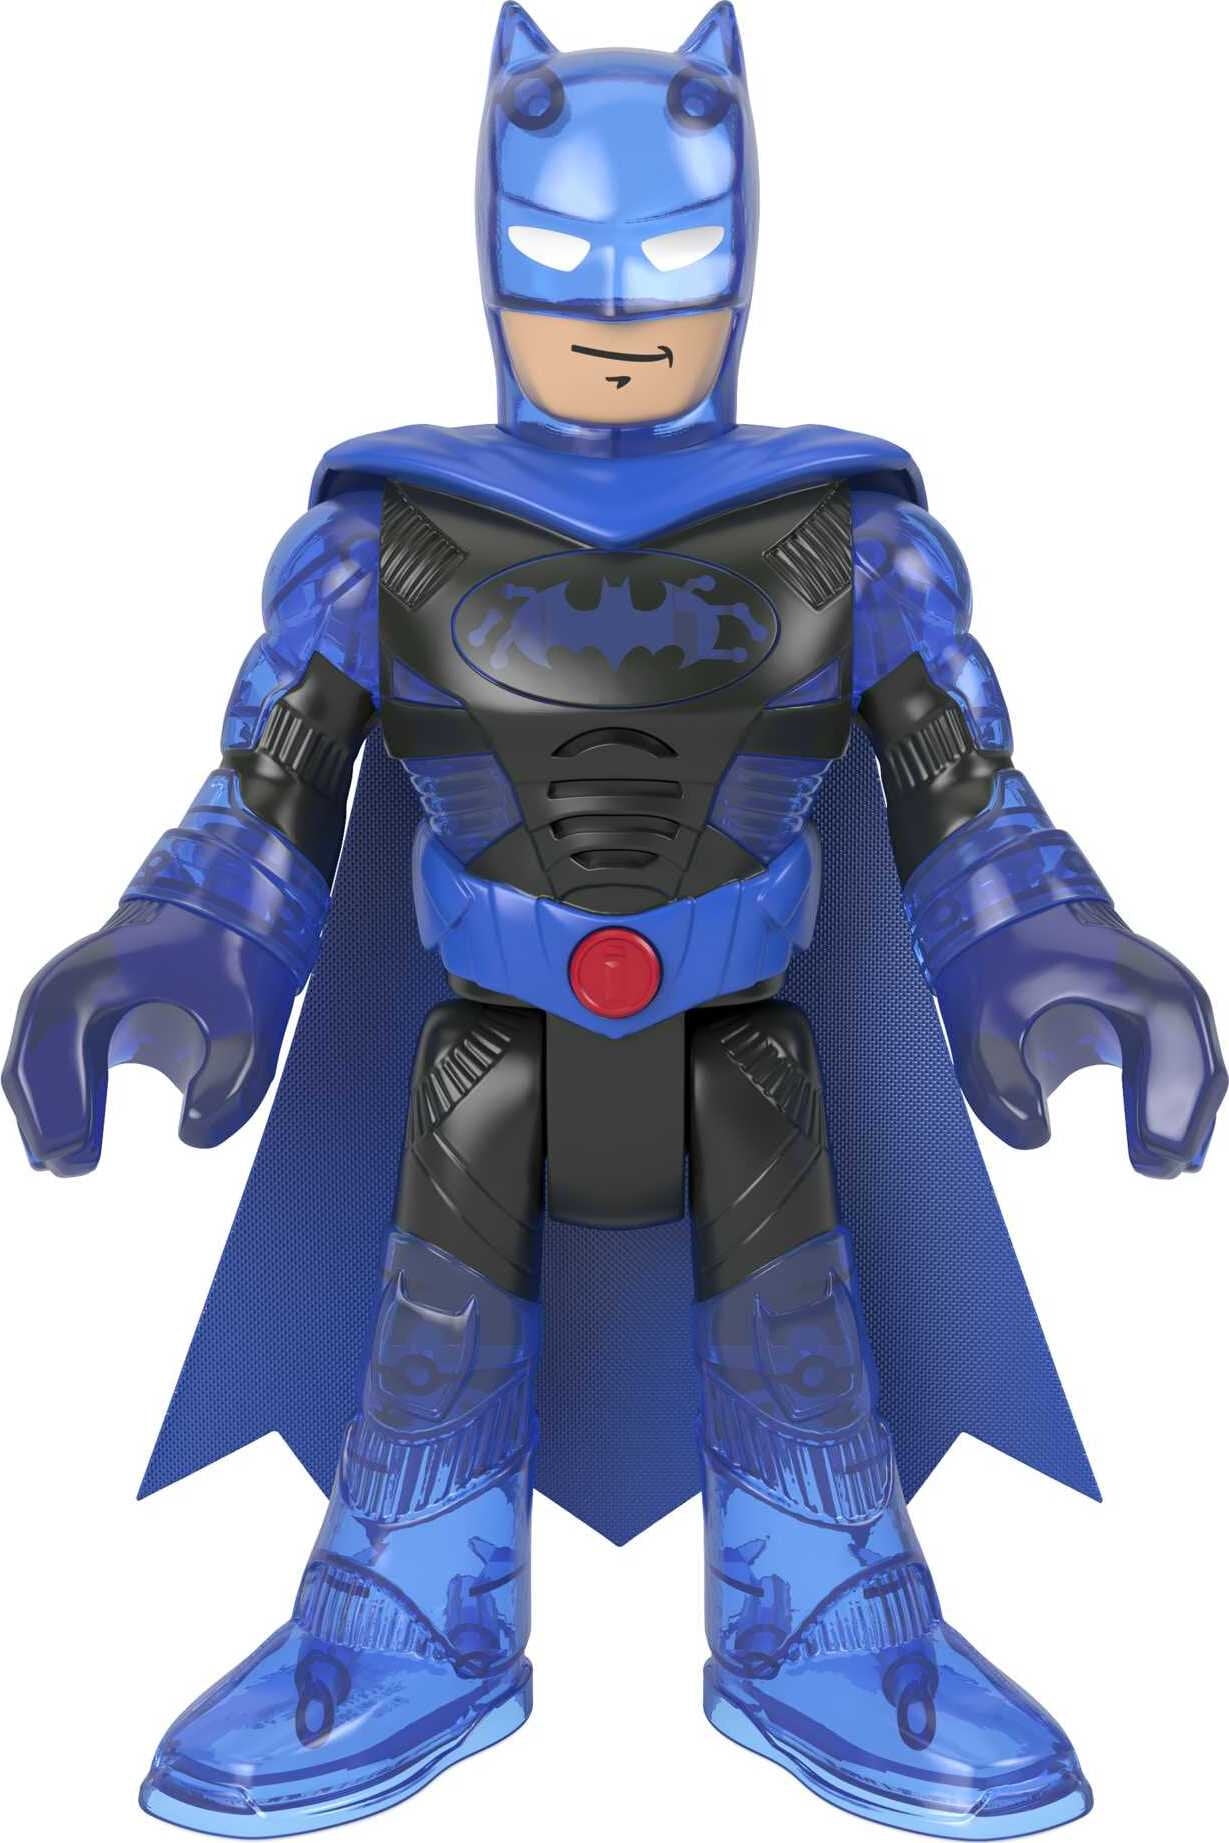 GLD99 for sale online Fisher-Price Imaginext DC Super Friends 80th Anniversary Batman Collection 